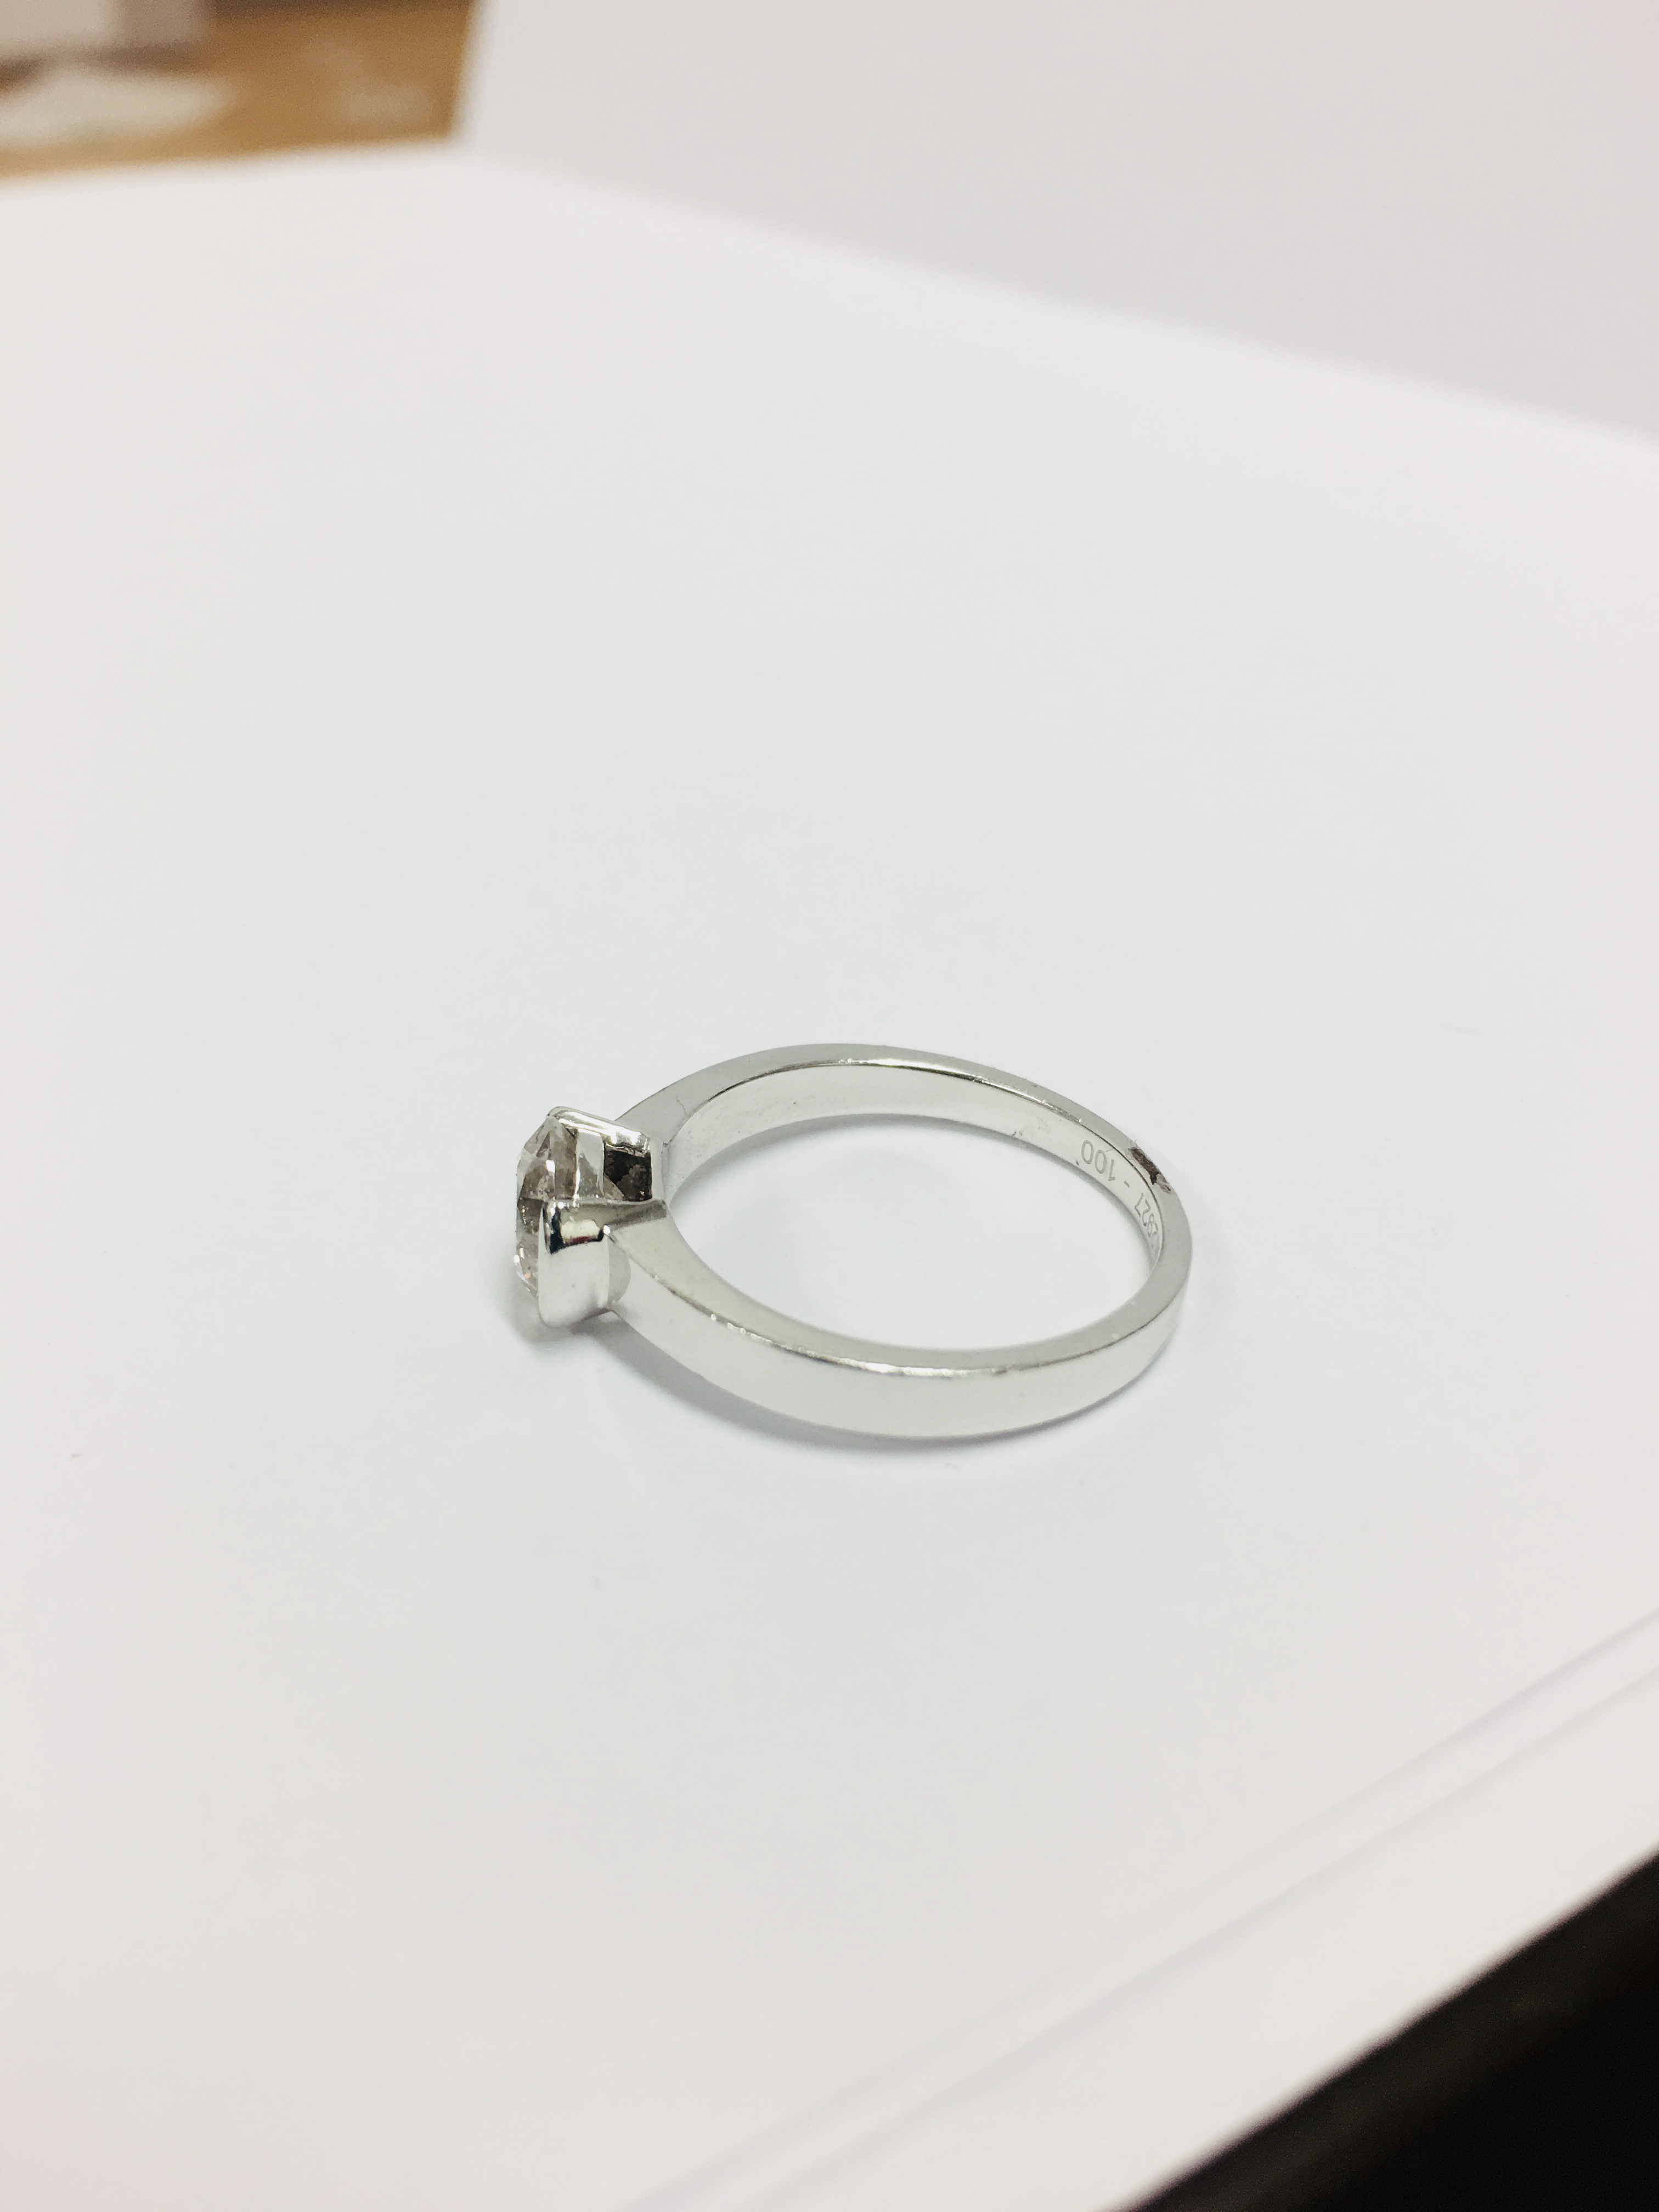 1.06ct diamond solitaire ring with a brilliant cut diamond - Image 2 of 4